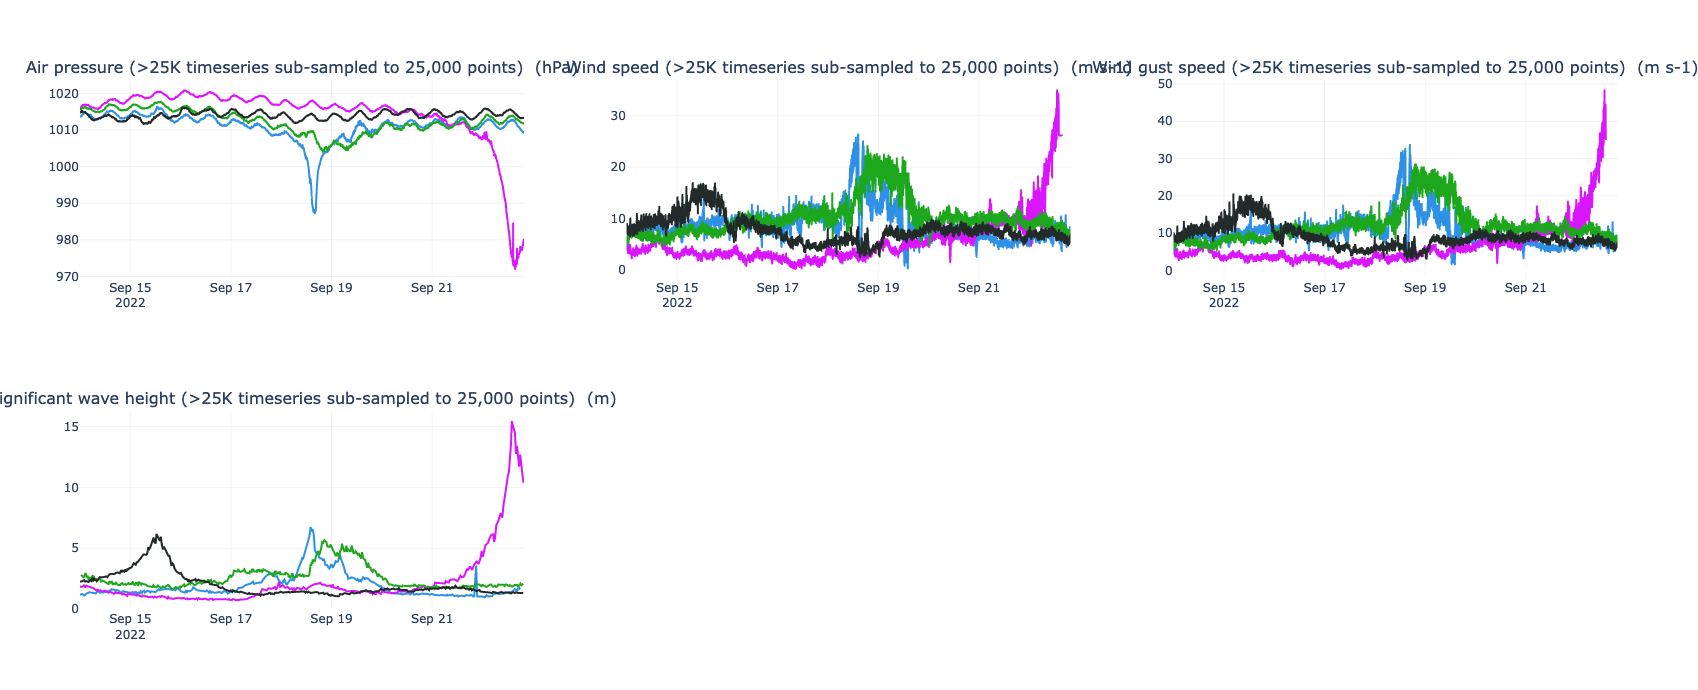 Time series of barometric pressure, wind speed, wind gust and significant wave height for saildrones